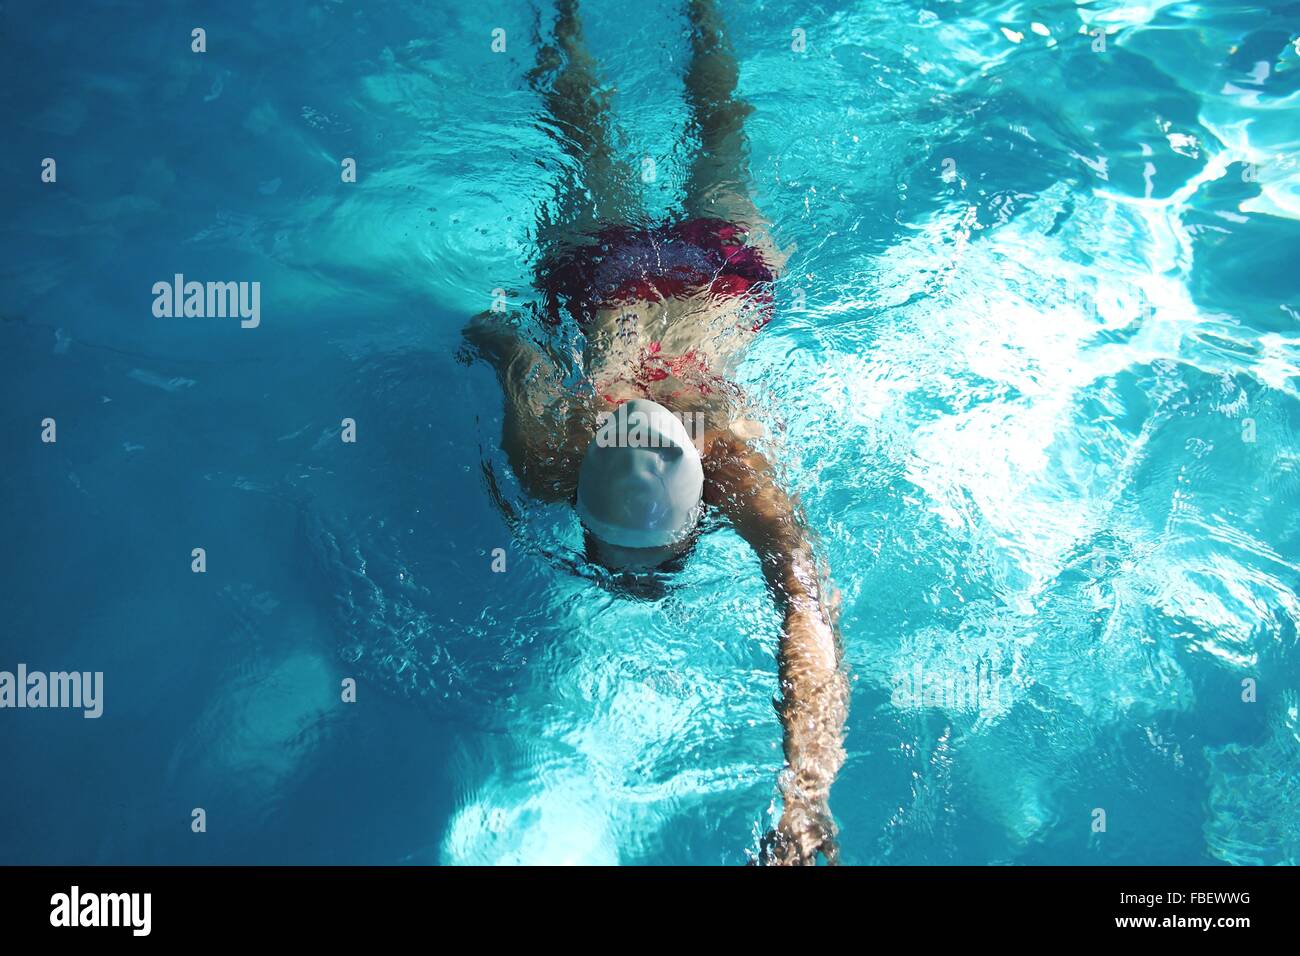 High Angle View Of Woman In Swimming Pool Stock Photo